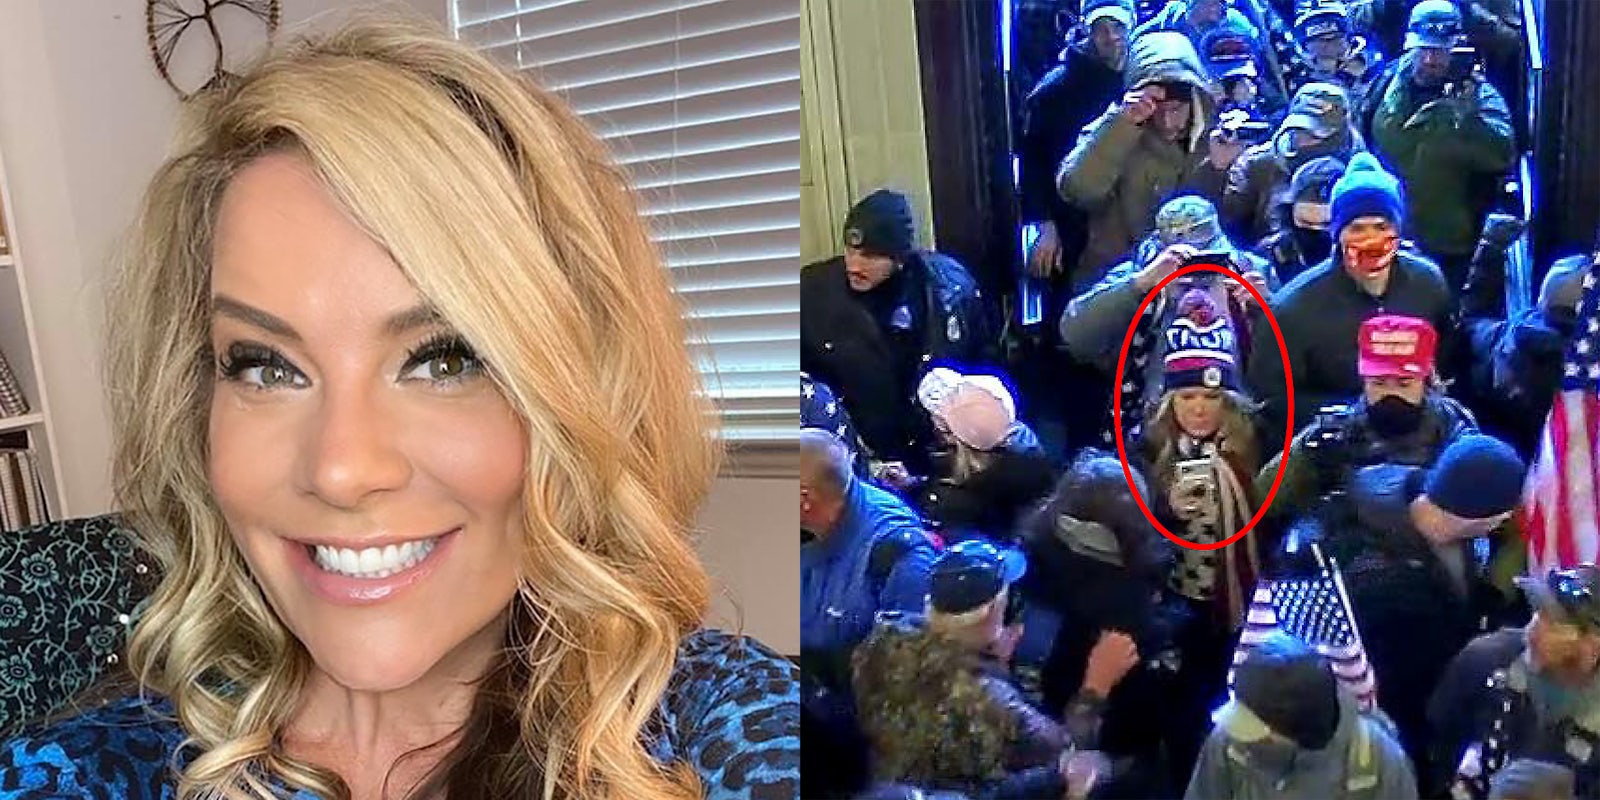 A woman smiling into camera. (L) and people breaking into the capitol (R).